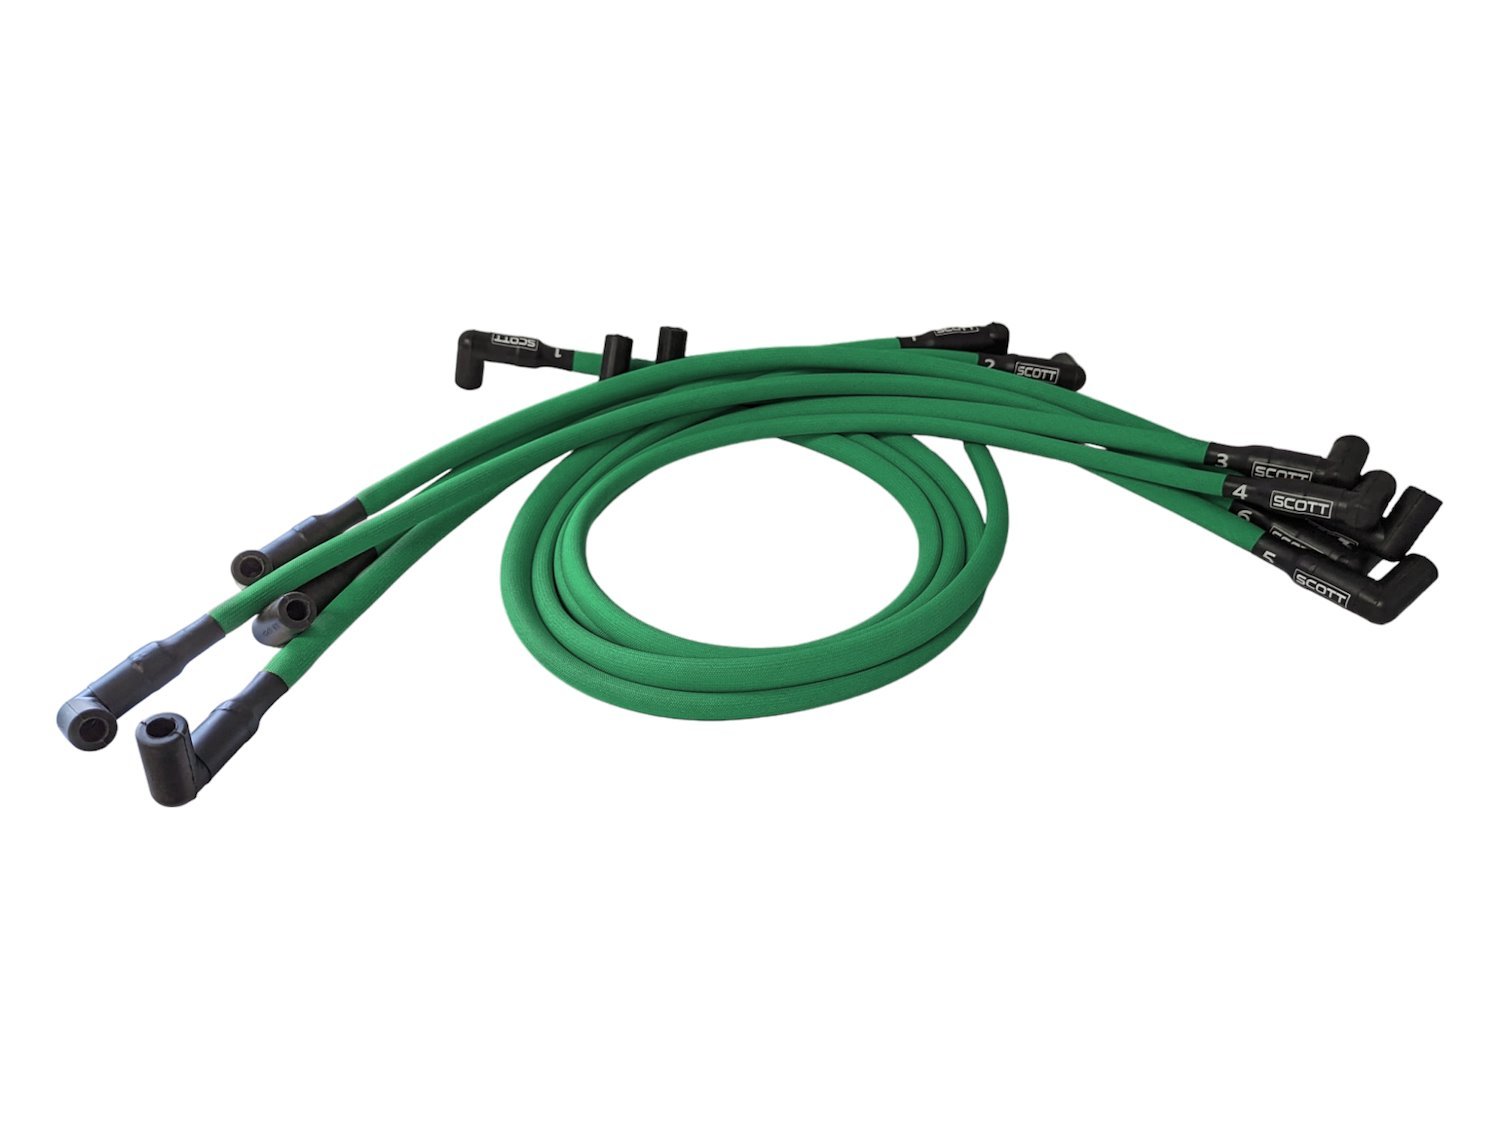 SPW300-PS-402-4 Super Mag Fiberglass-Oversleeved Spark Plug Wire Set for Small Block Chevy, Over Valve Cover [Green]